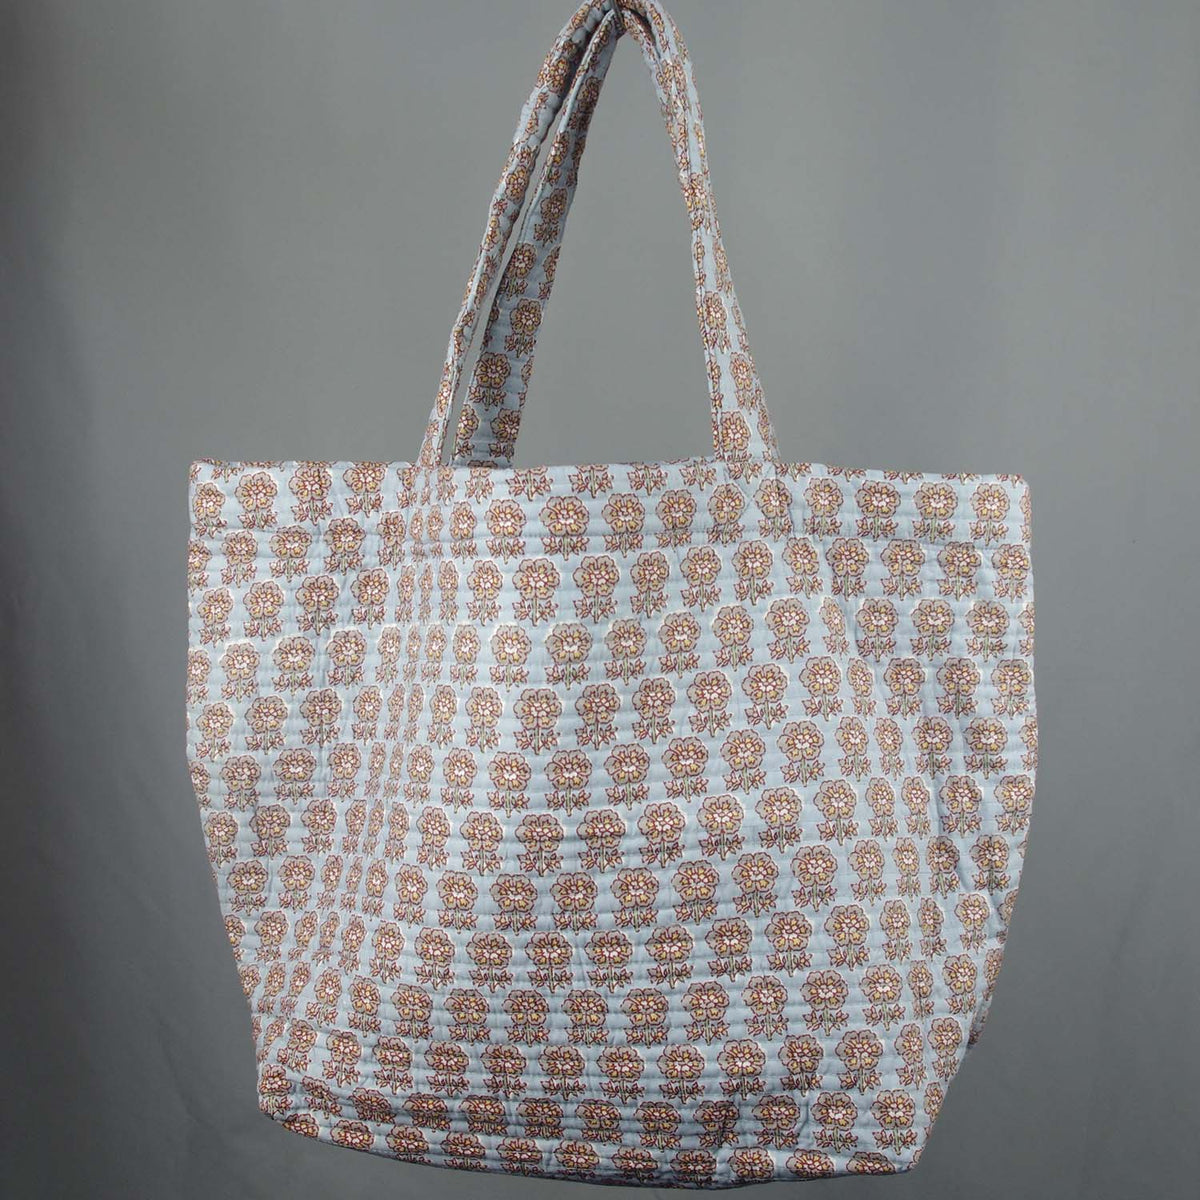 Cotton Quilted Large Shoppping / Beach Bag - Grey Floral